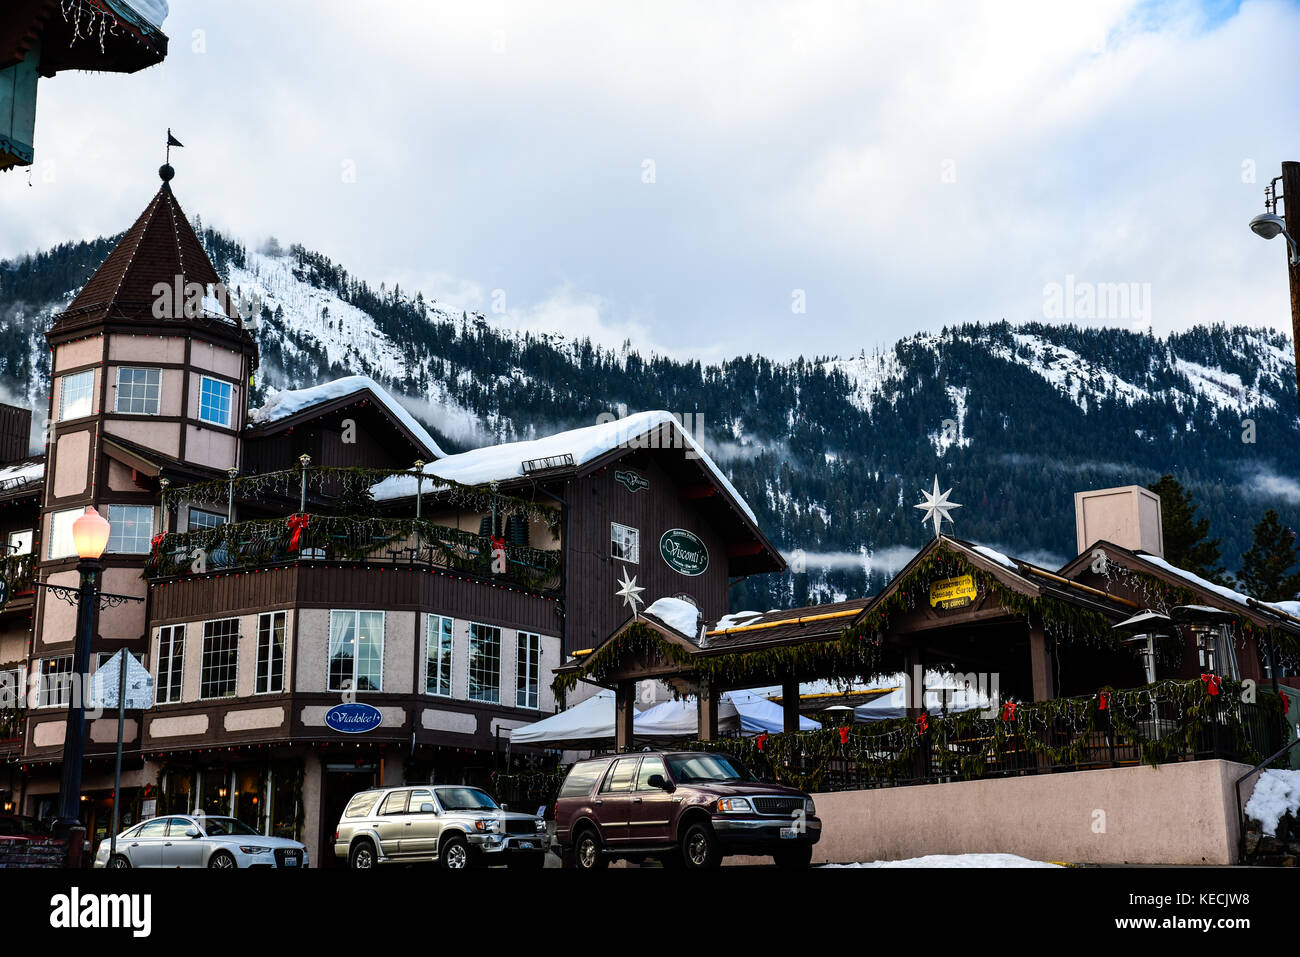 Snow on the Roof - There is still almost a foot of snow on the roofs of Leavenworth, Washington, buildings at the end of January. Stock Photo